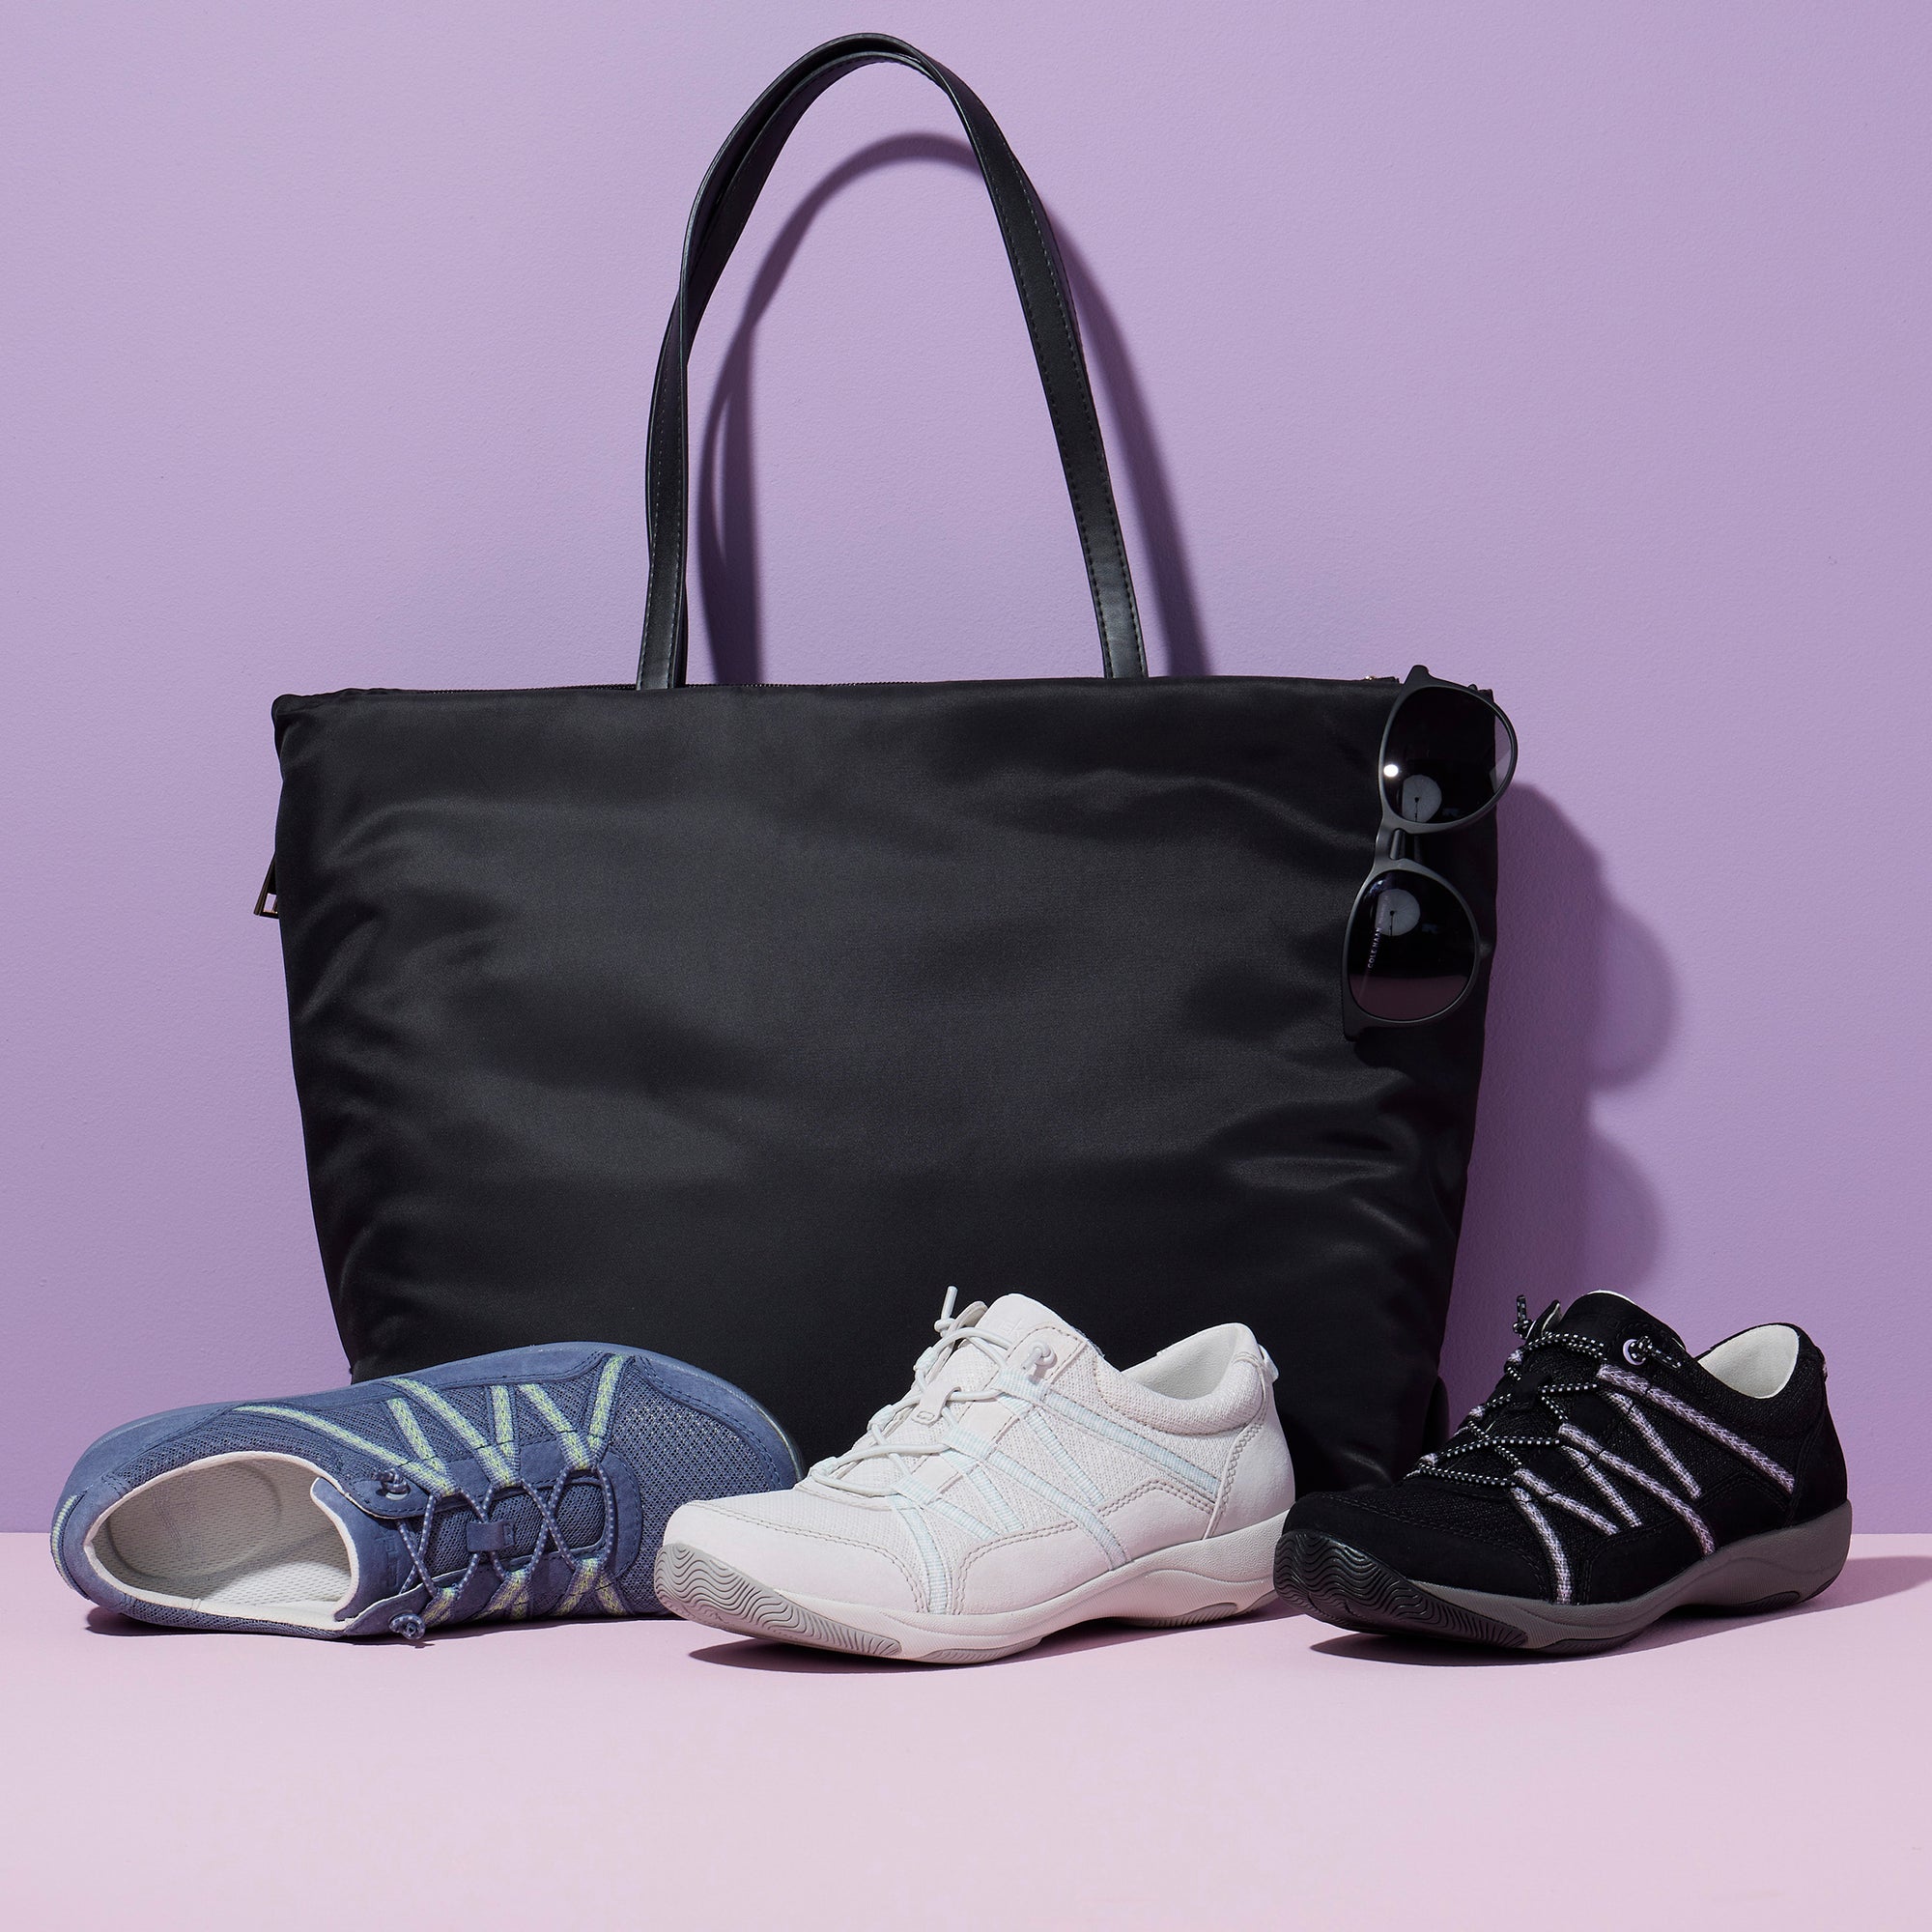 Three different colors of a lightweight and breathable sneaker that&#39;s great for travel.